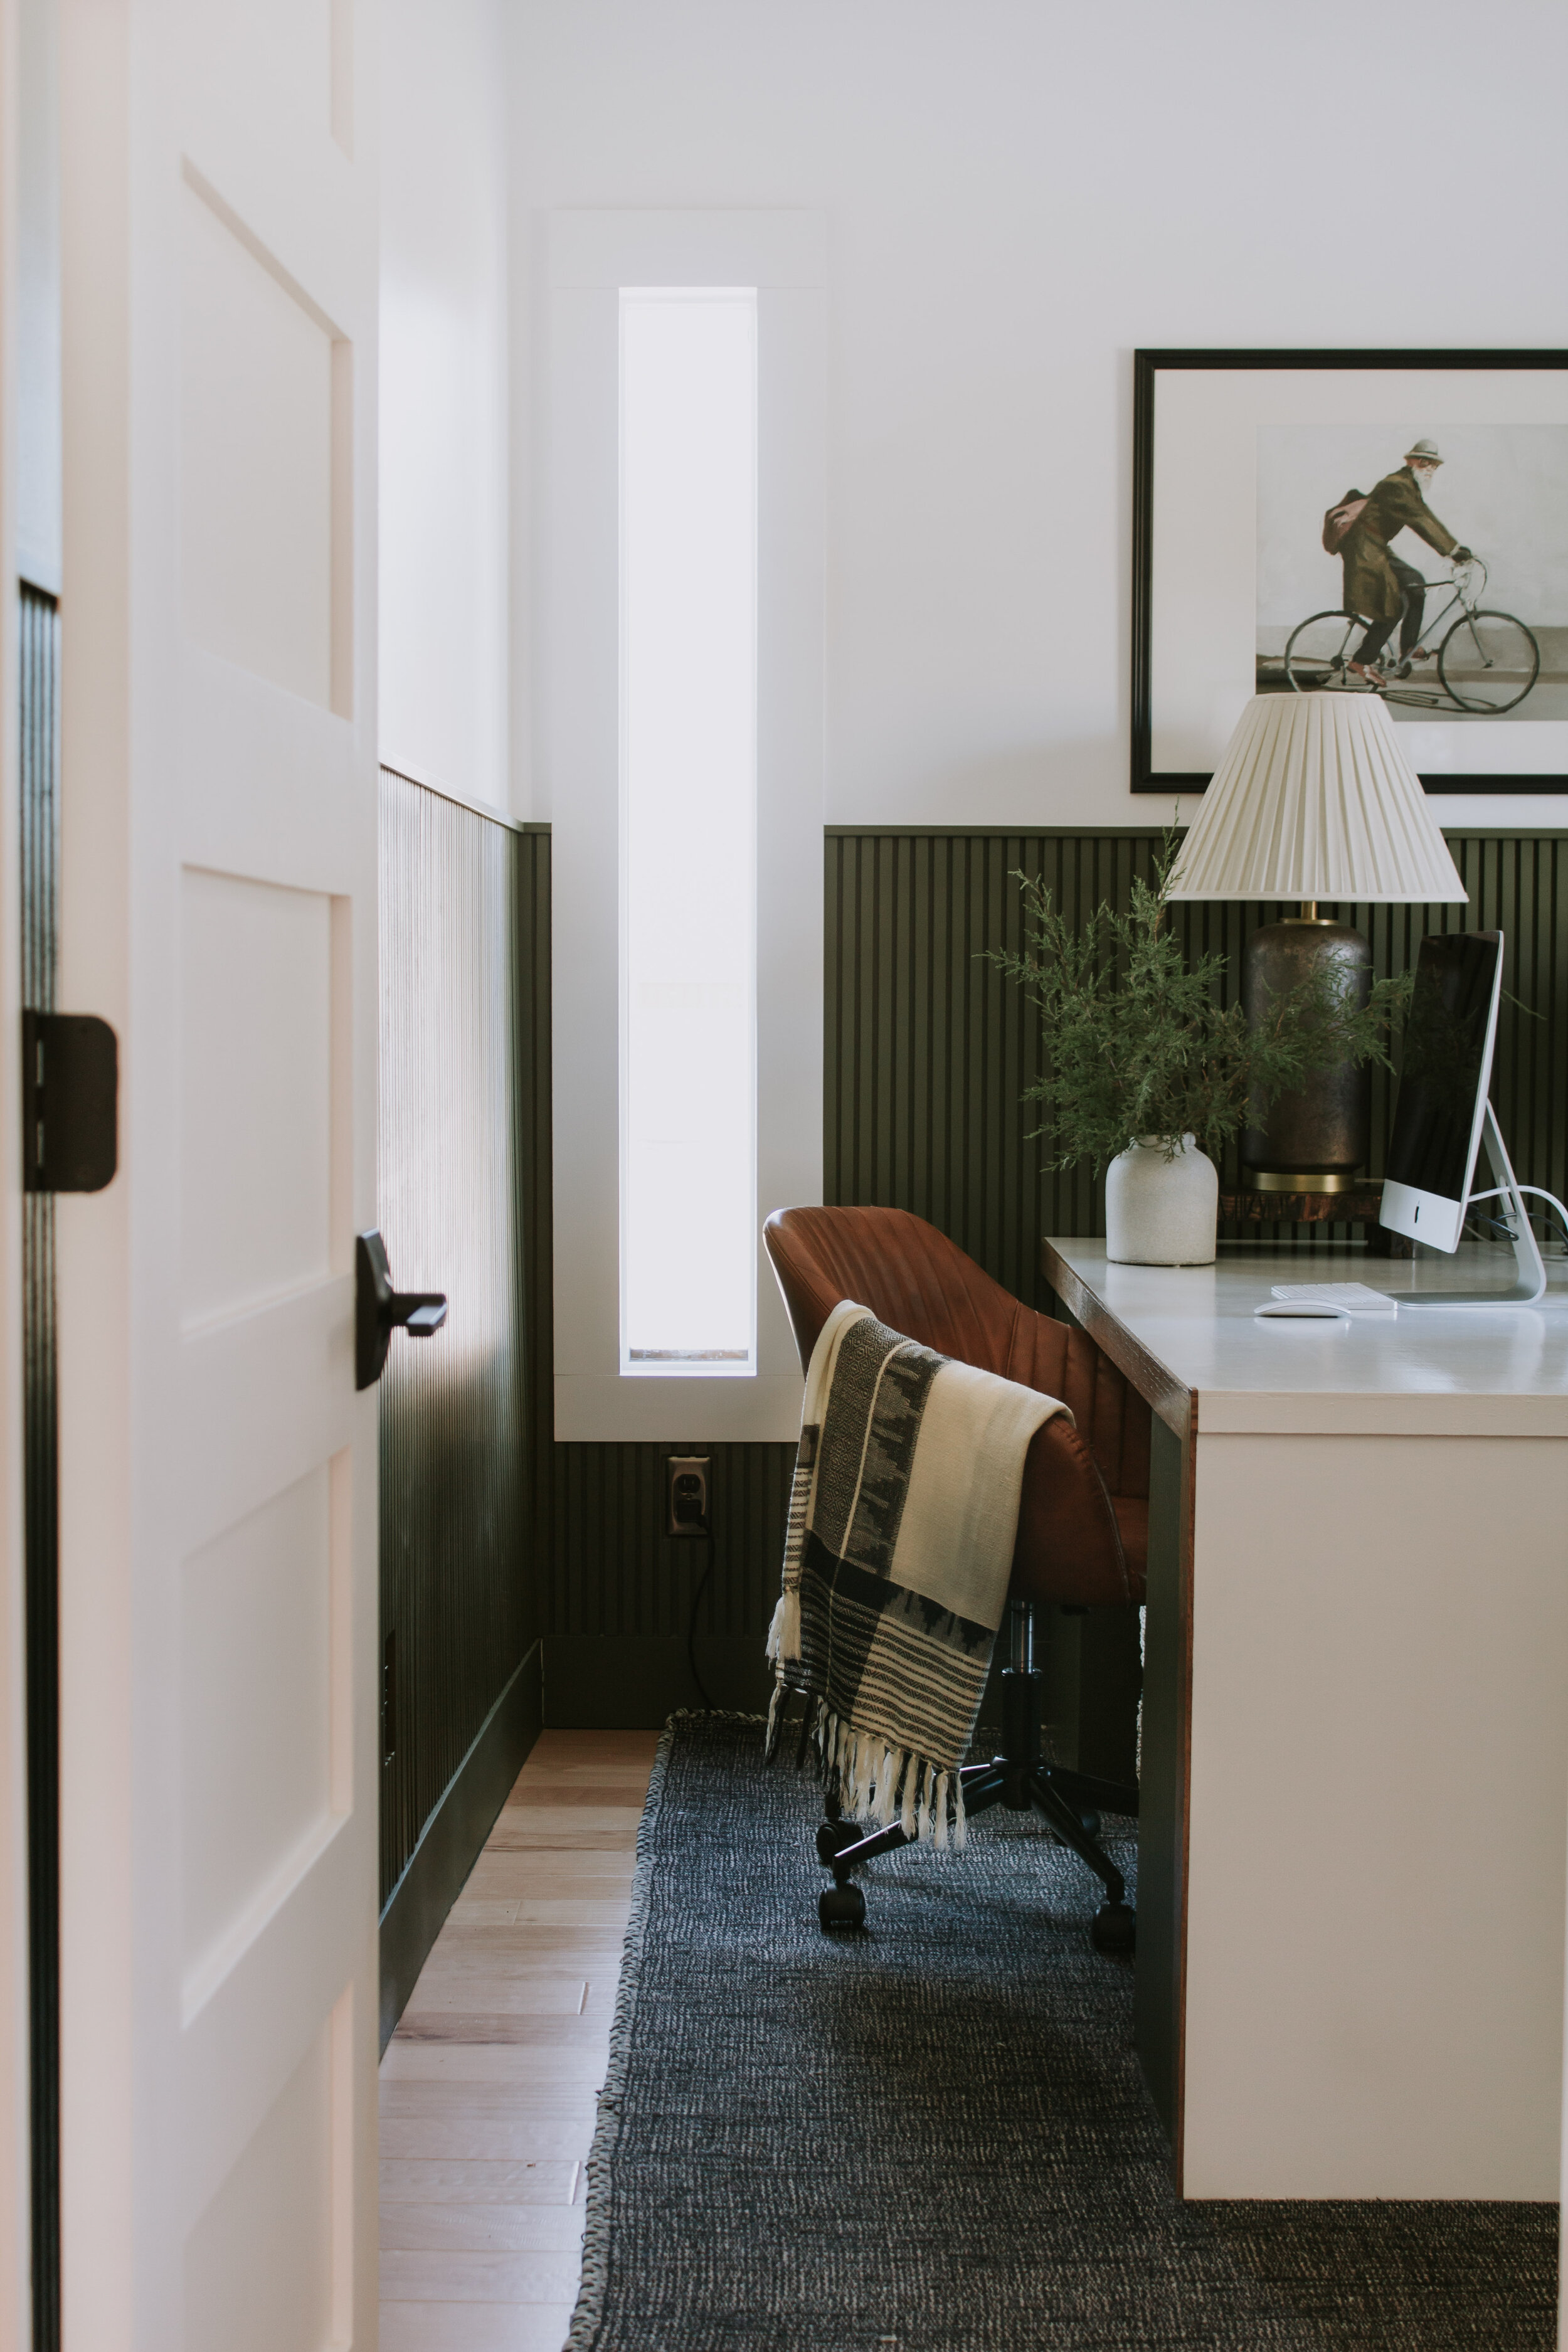 How to pick the right home office desk chair + 15 of my favorites | Nadine Stay - Home office decor and inspiration by Nadine Stay. 15 of the most stylish task chairs and office chairs. Designer tips for finding the right office chair. | Nadine Stay